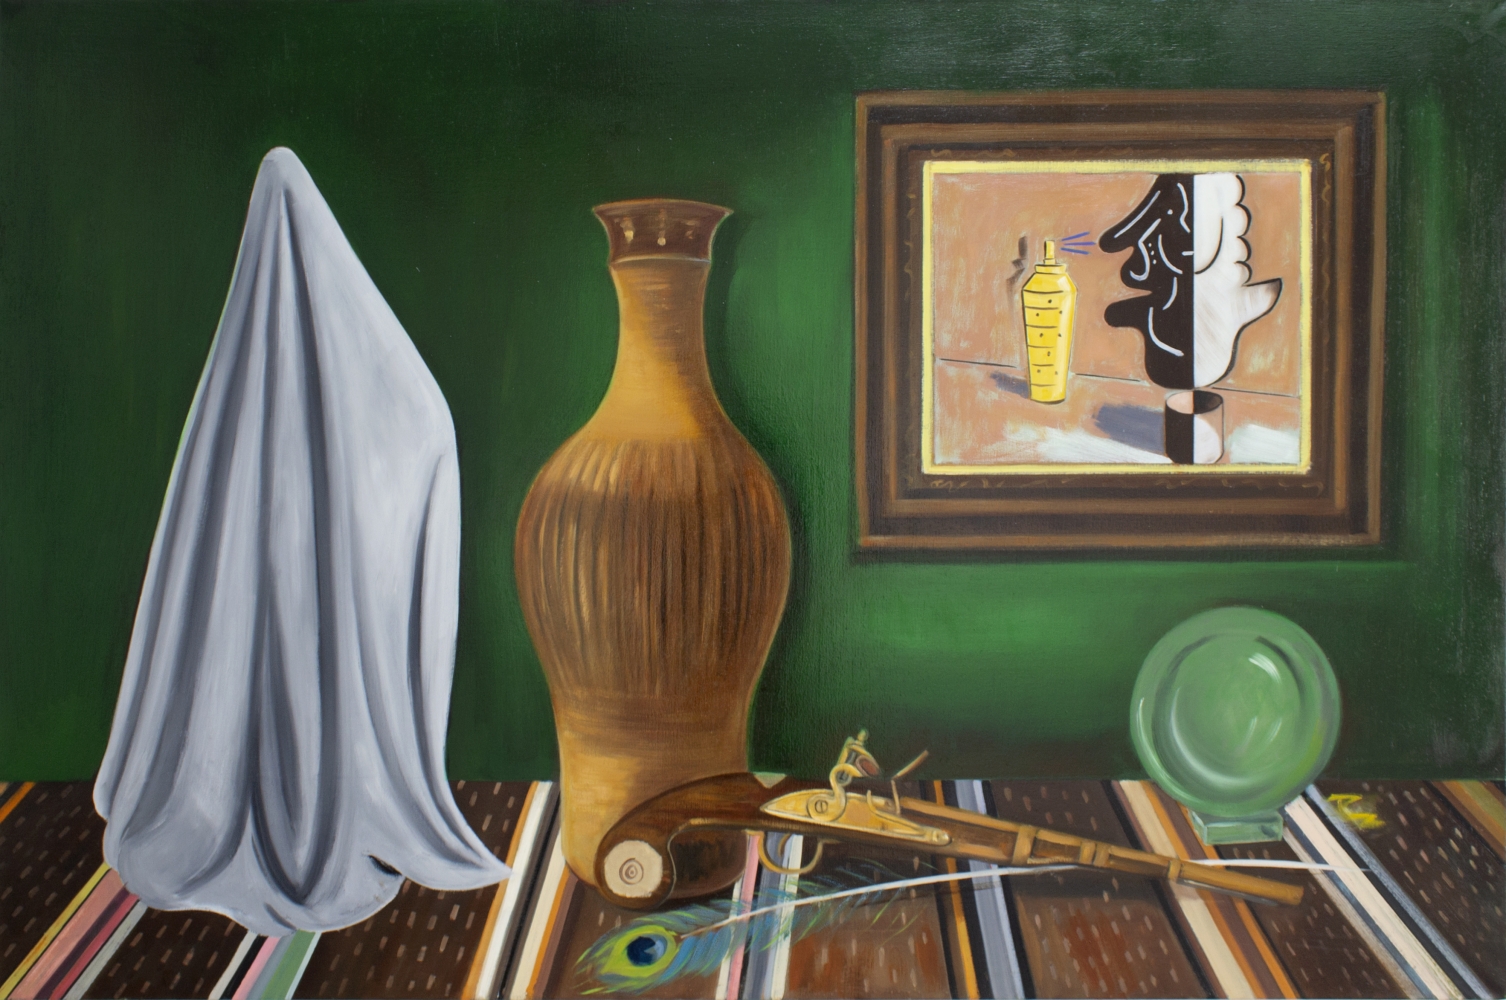 Raul Guerrero, Still Life with Sarape and Crystal Ball, 2012